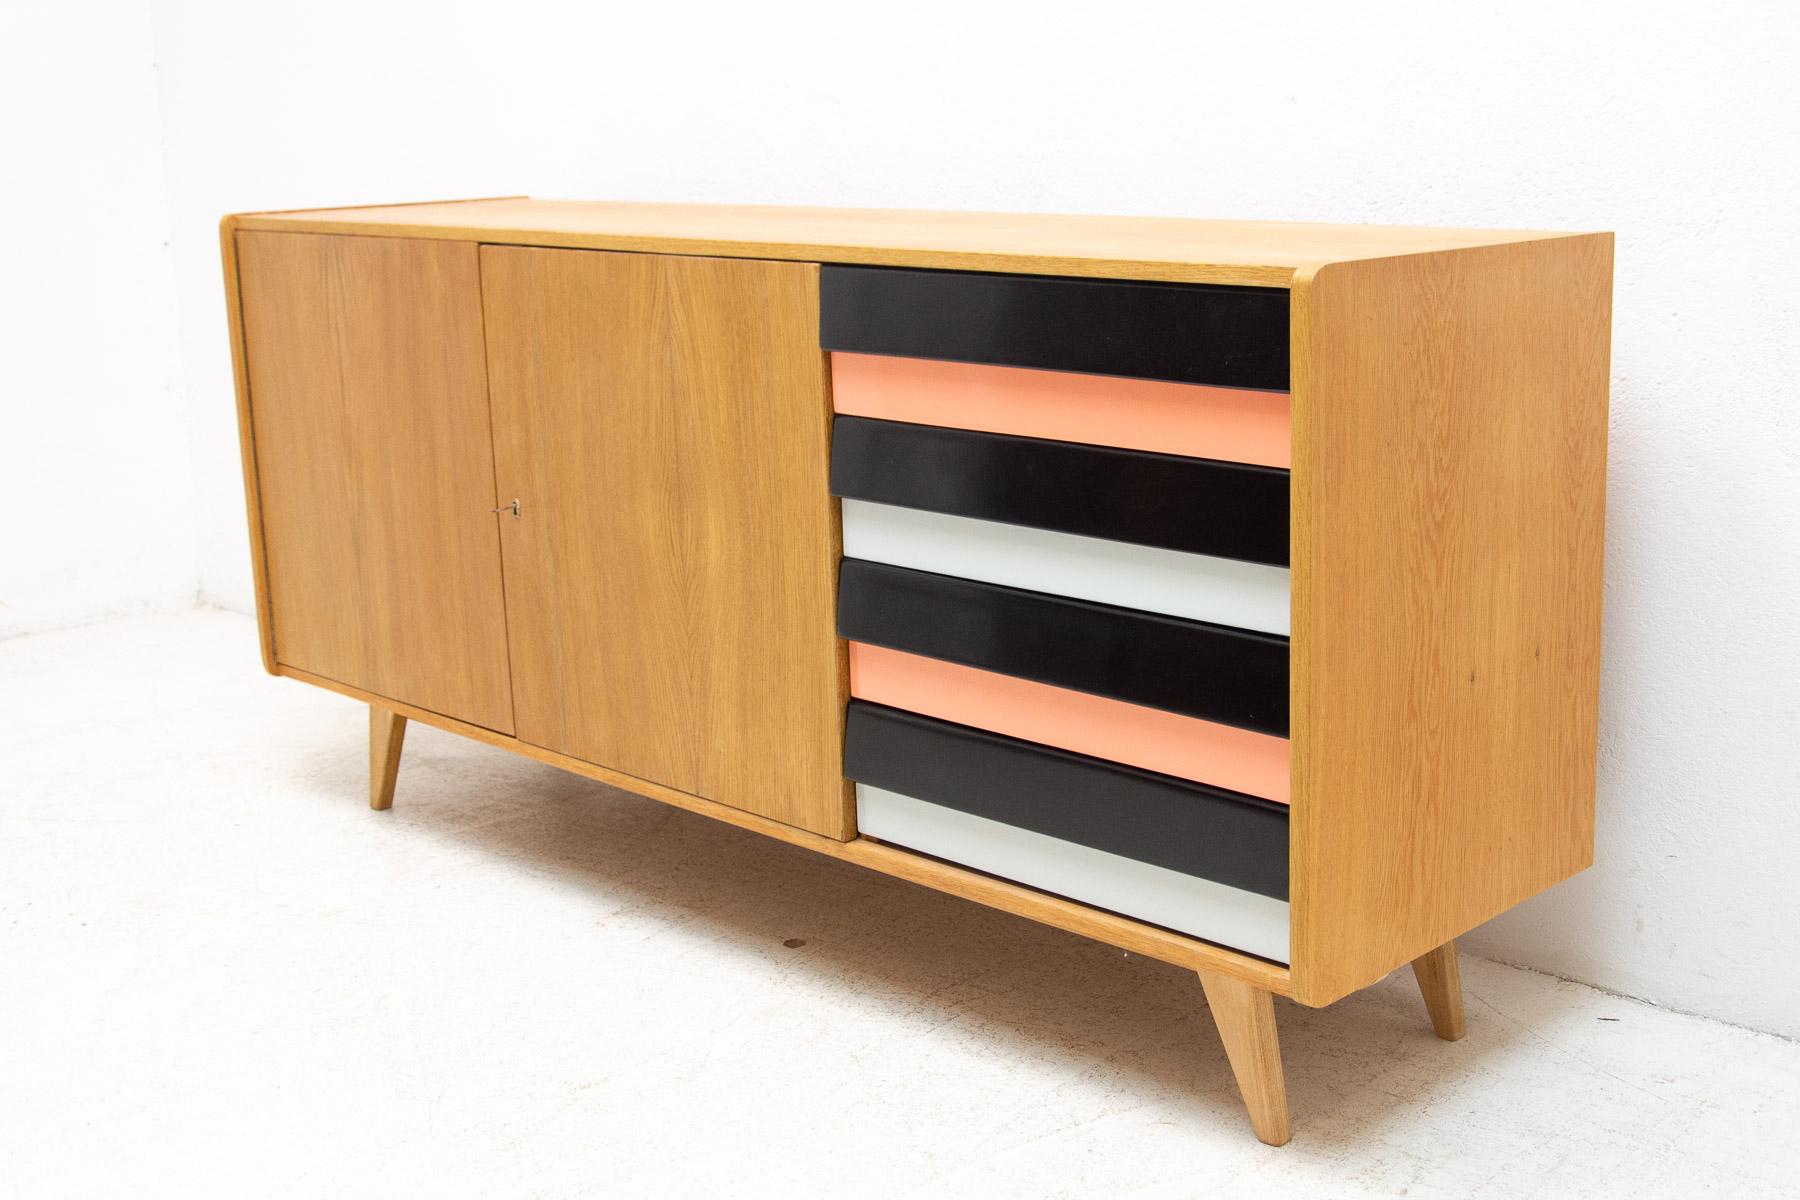 A popular Vintage sideboard model U-460 from the 1960´s. It was designed by Jiri Jiroutek for Interier Praha. It features a beech wood, plywood, colored lacquered drawers. Fully renovated. In excelent condition.

Measures: Height: 77 cm, lenght: